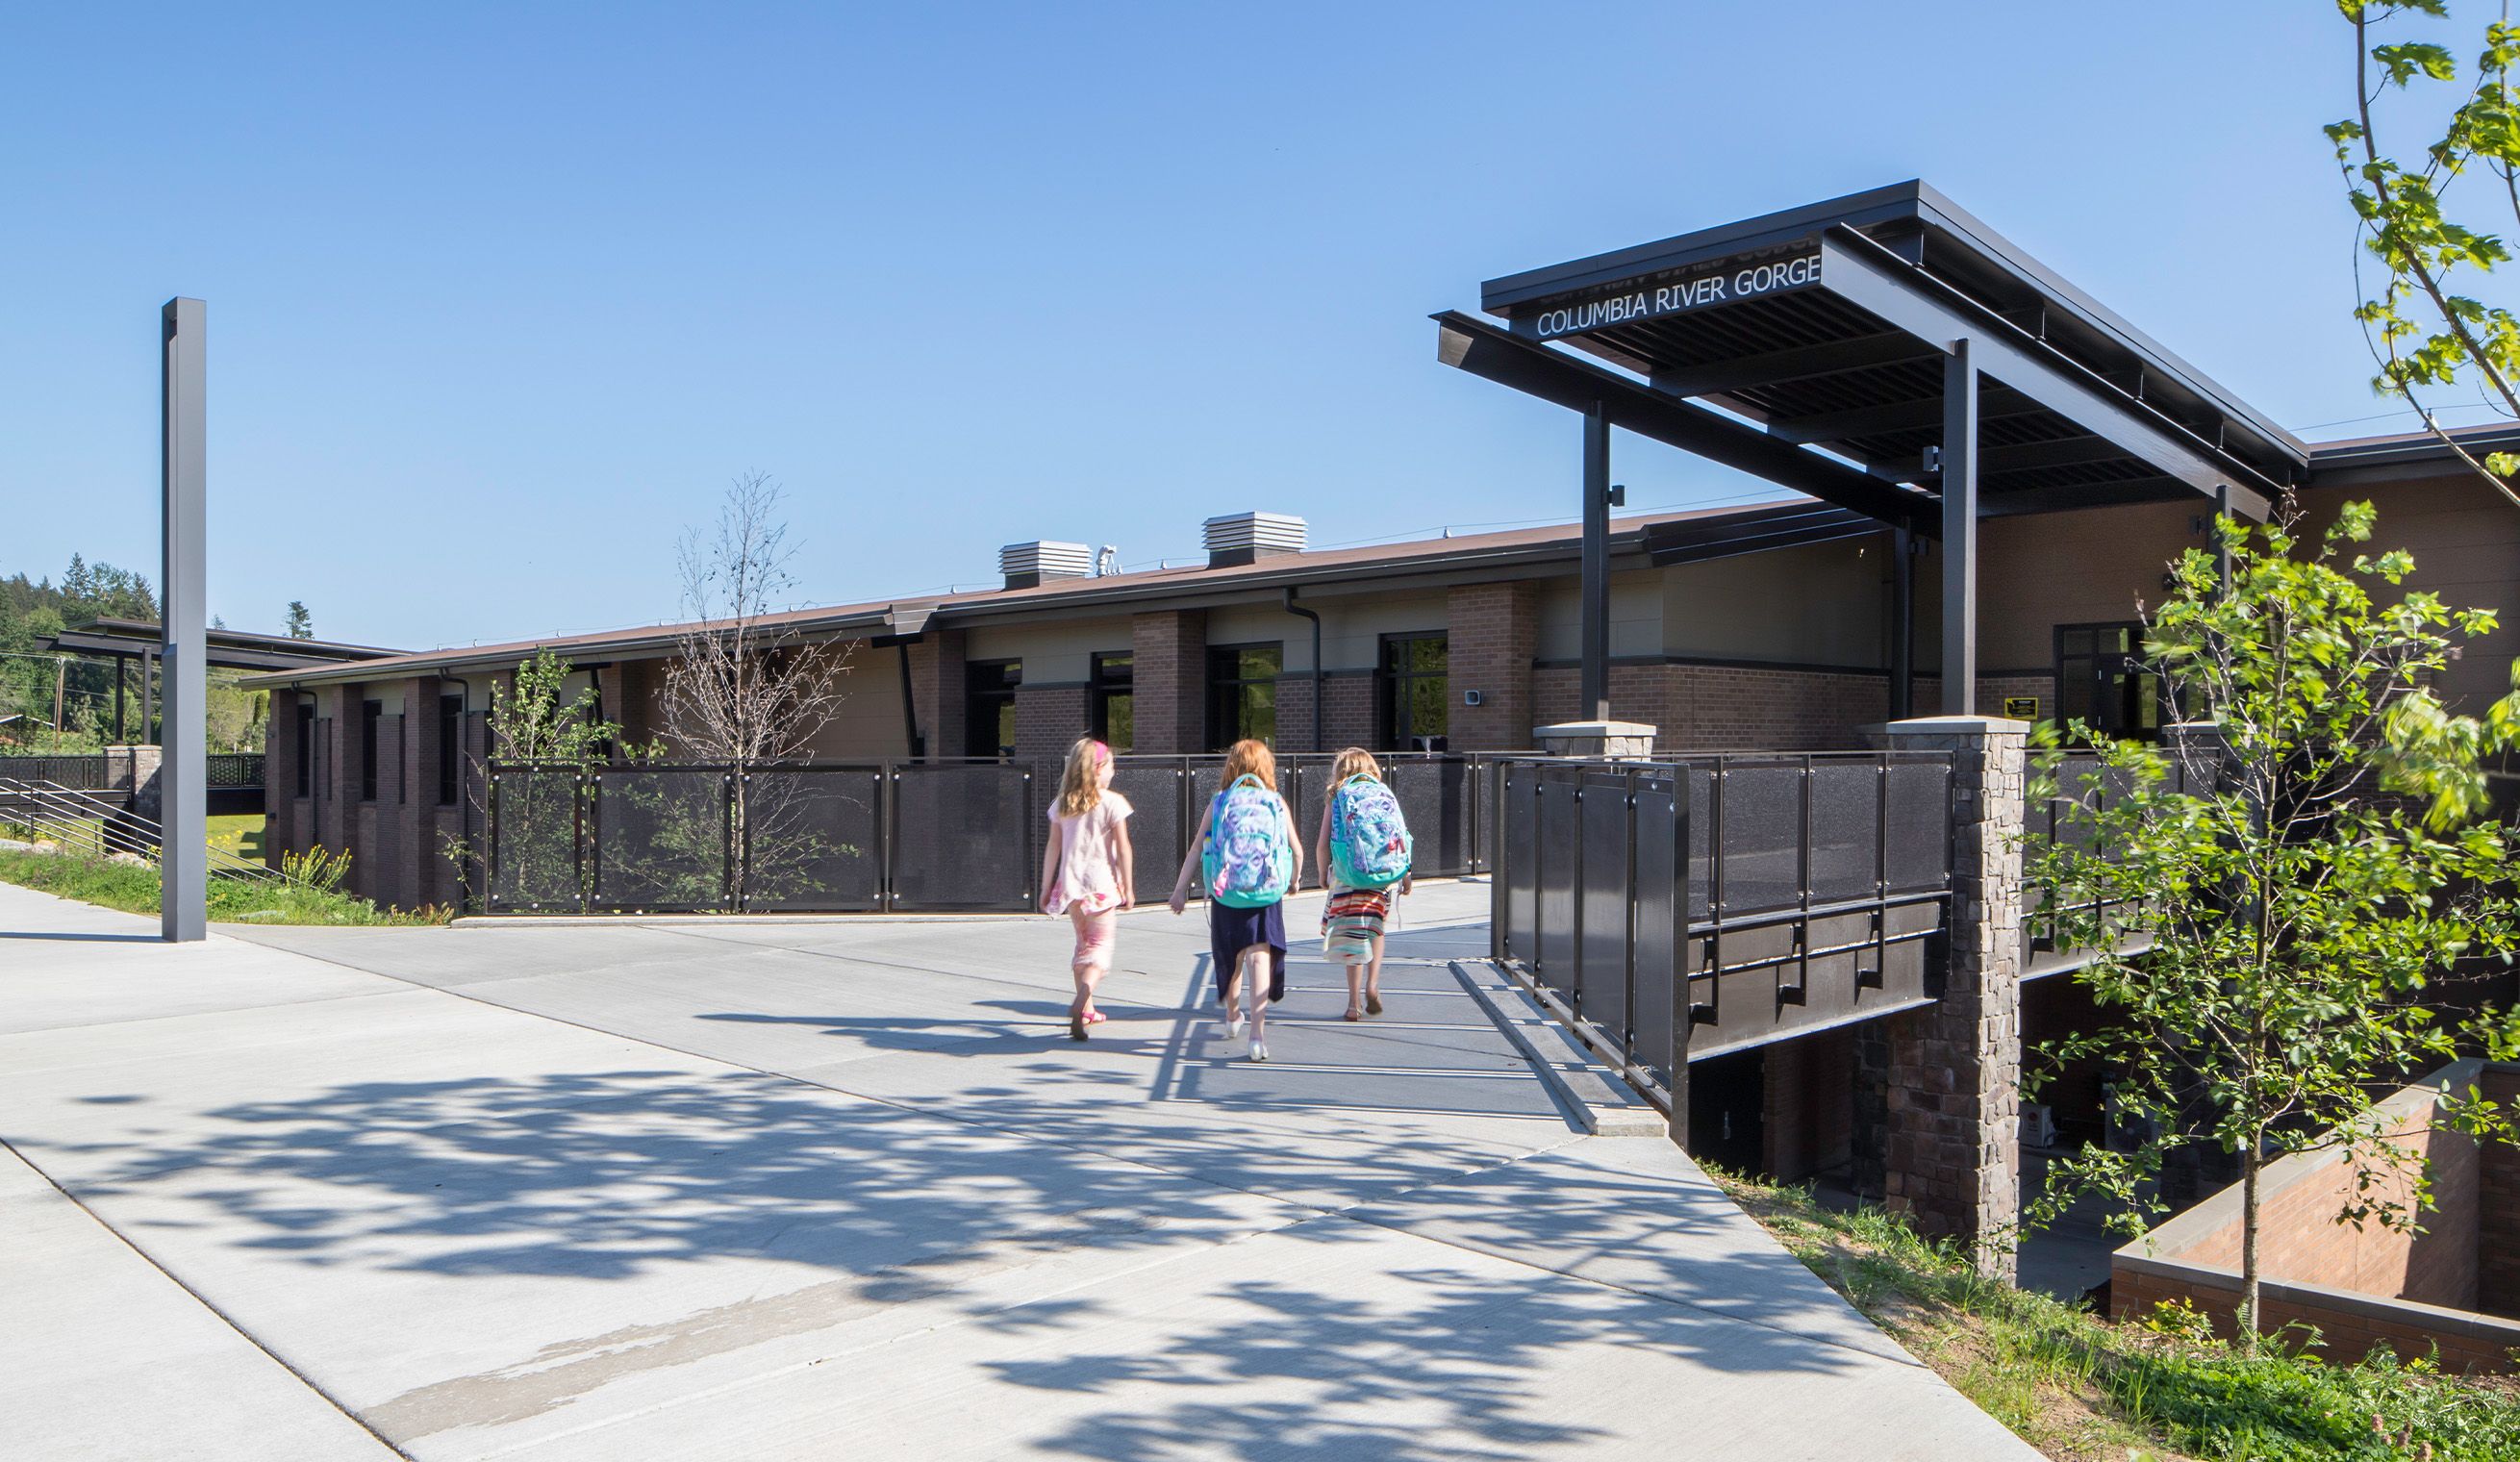 Jemtegaard Middle and Columbia River Gorge Elementary School in Vancouver, Washington designed by LSW Architects.